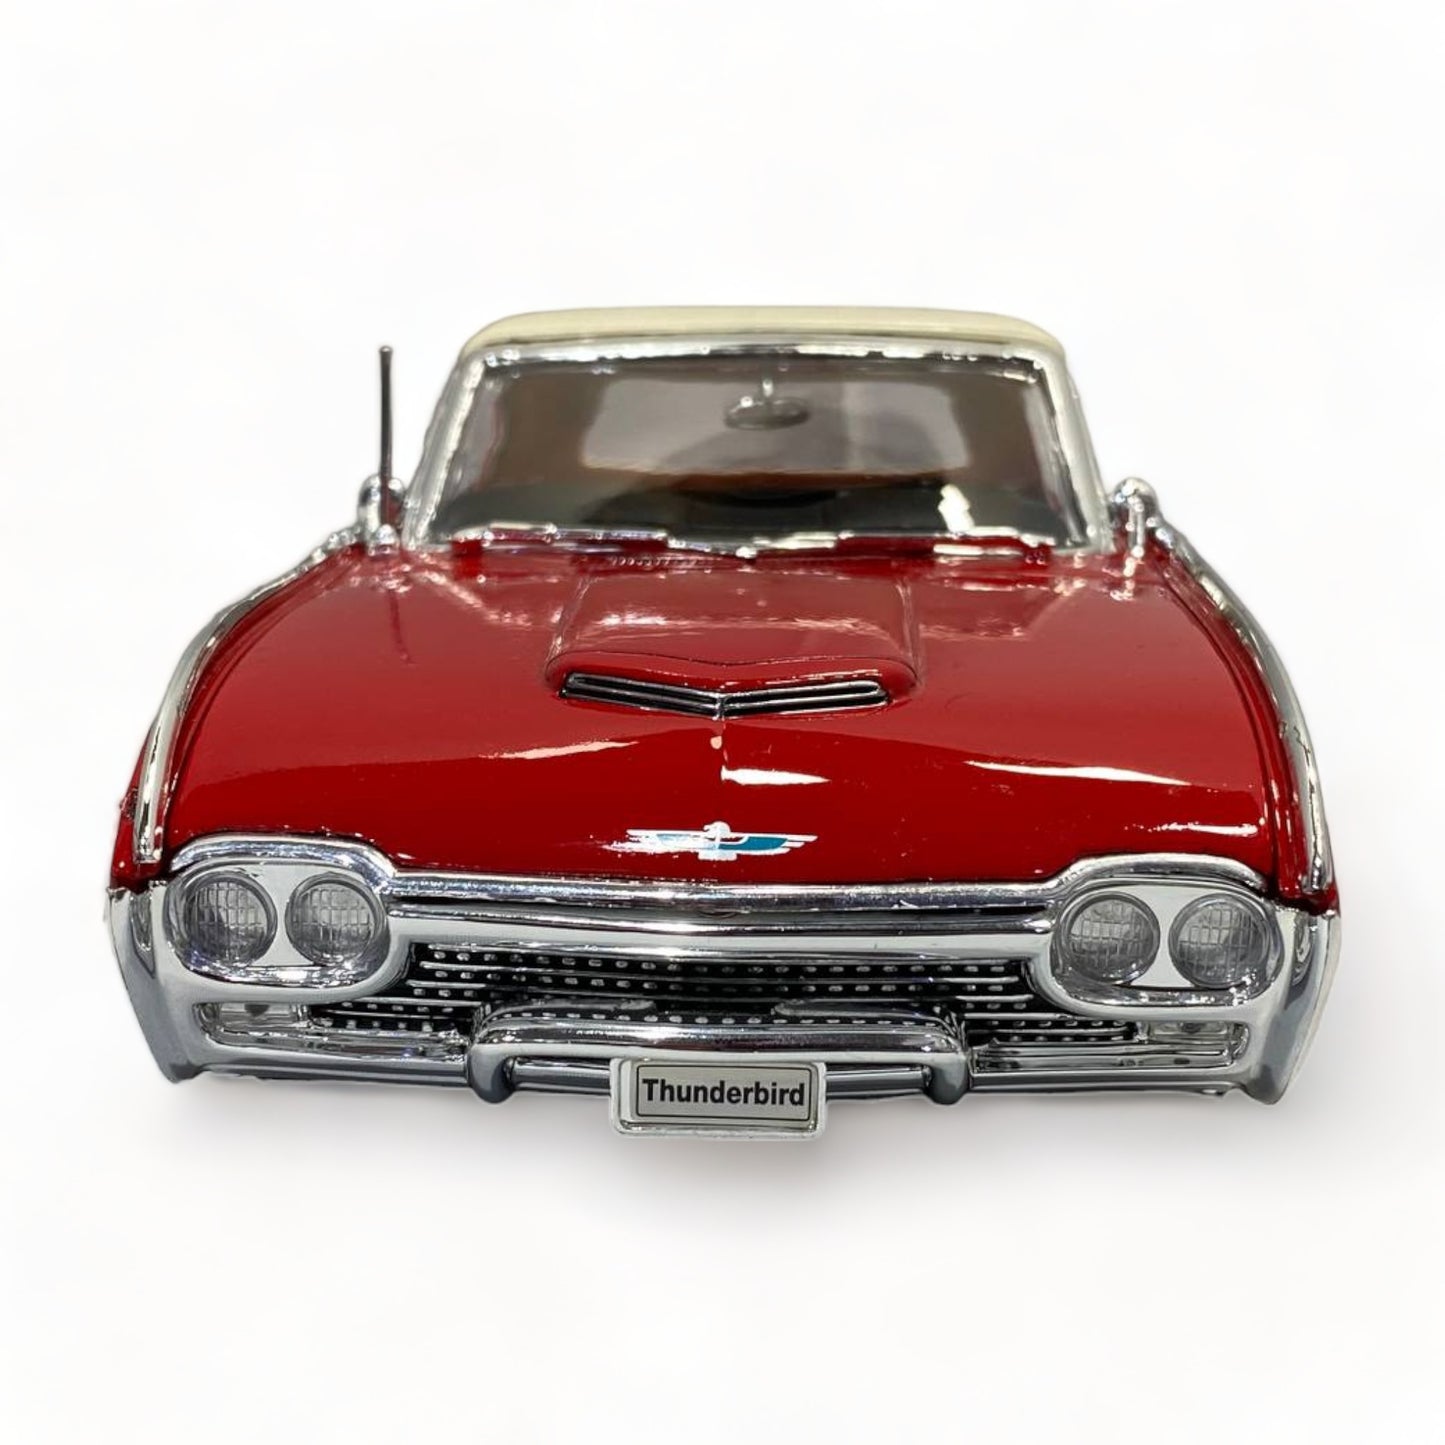 Welly Ford THUNDERBIRD SPORTS ROADSTER RED 1962|Sold in Dturman.com Dubai UAE.